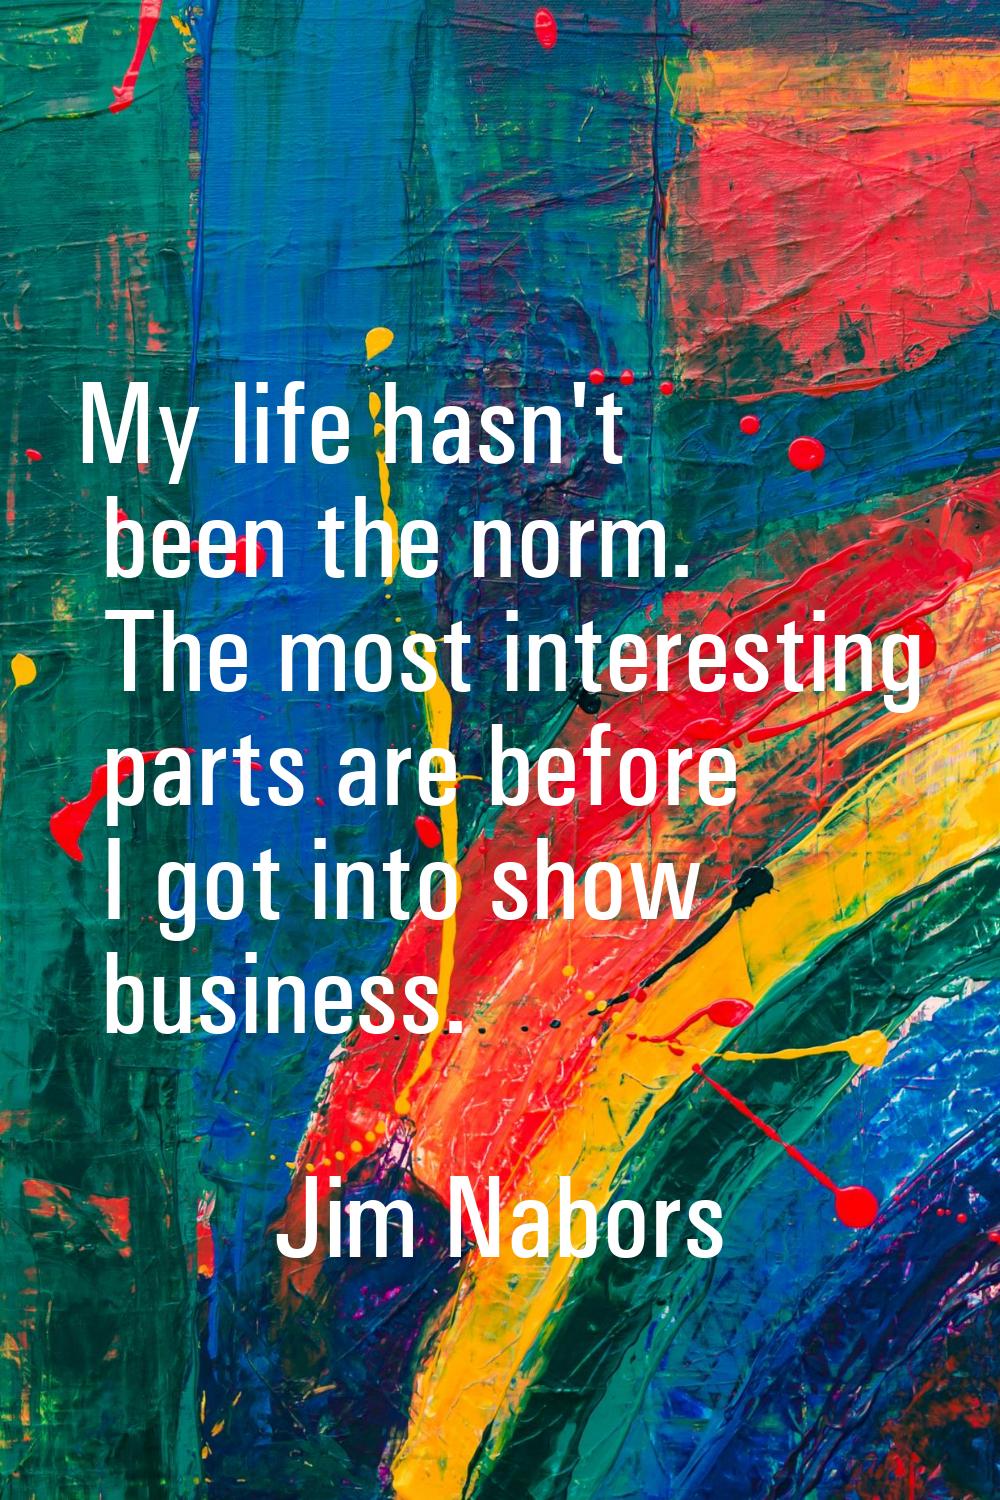 My life hasn't been the norm. The most interesting parts are before I got into show business.